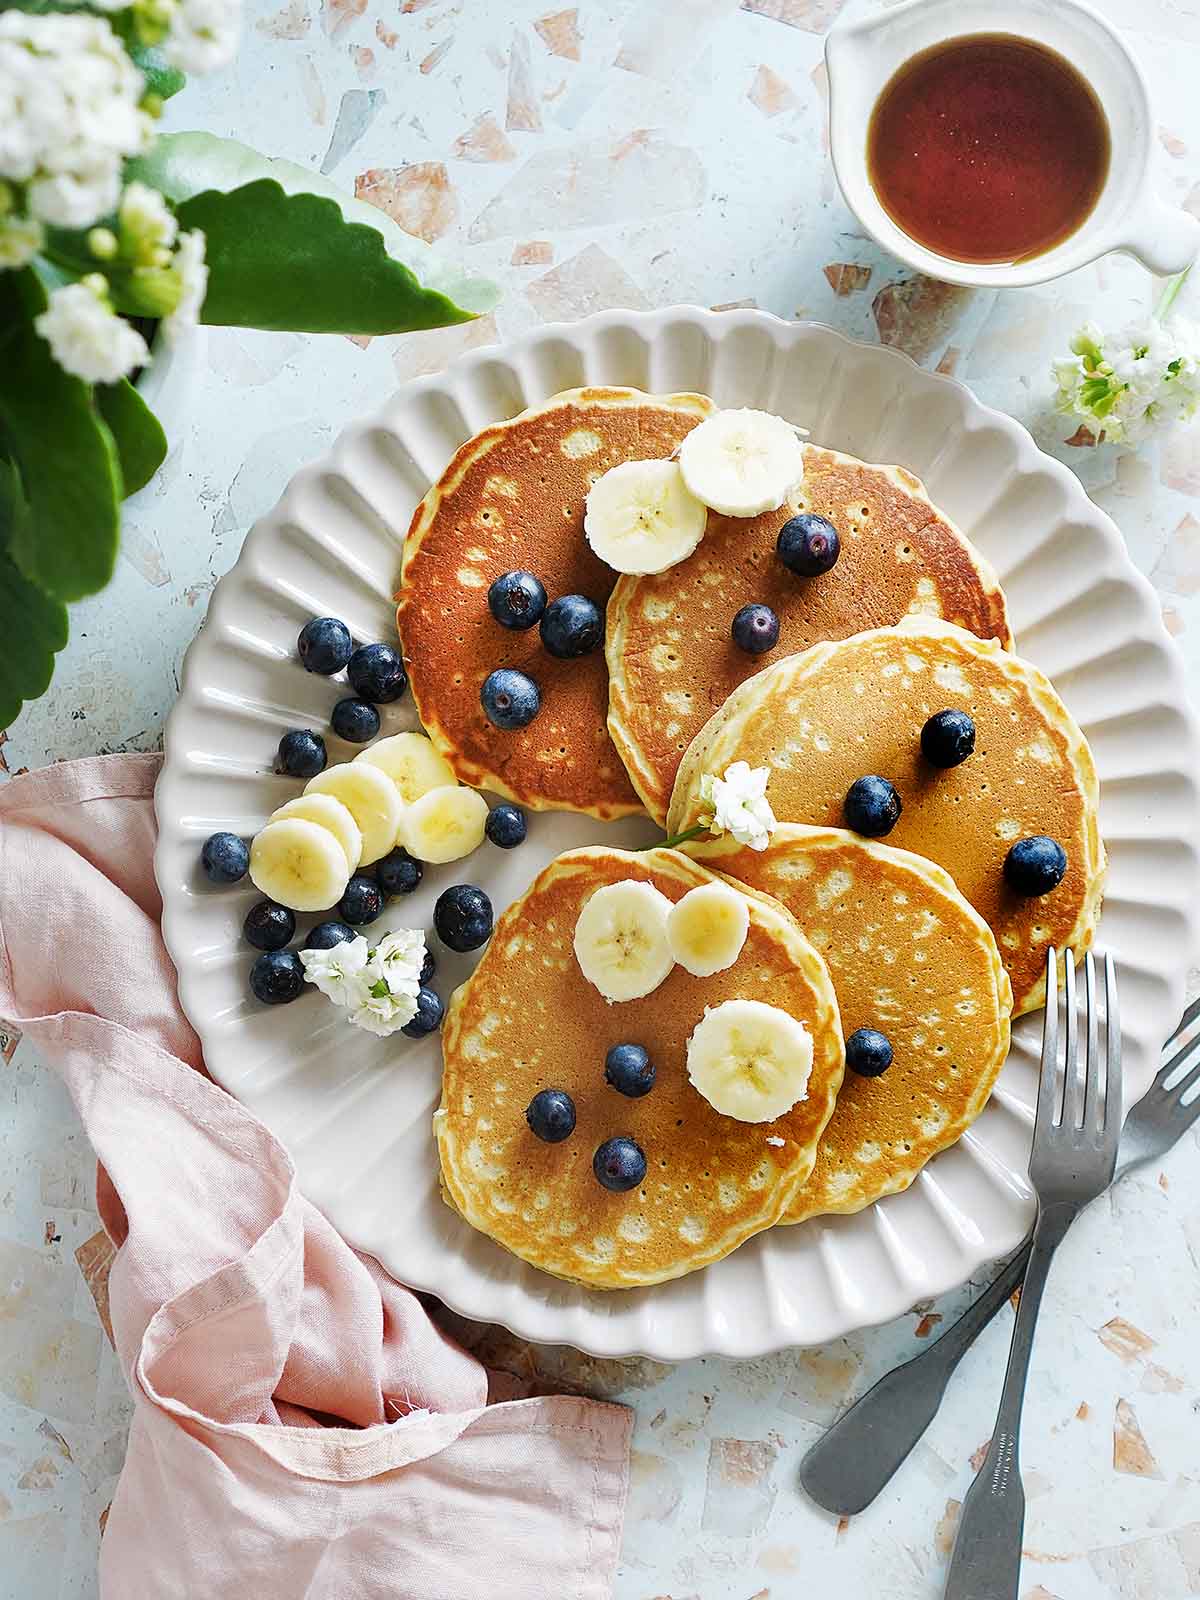 Five pancakes on a plate with flowers on the side.